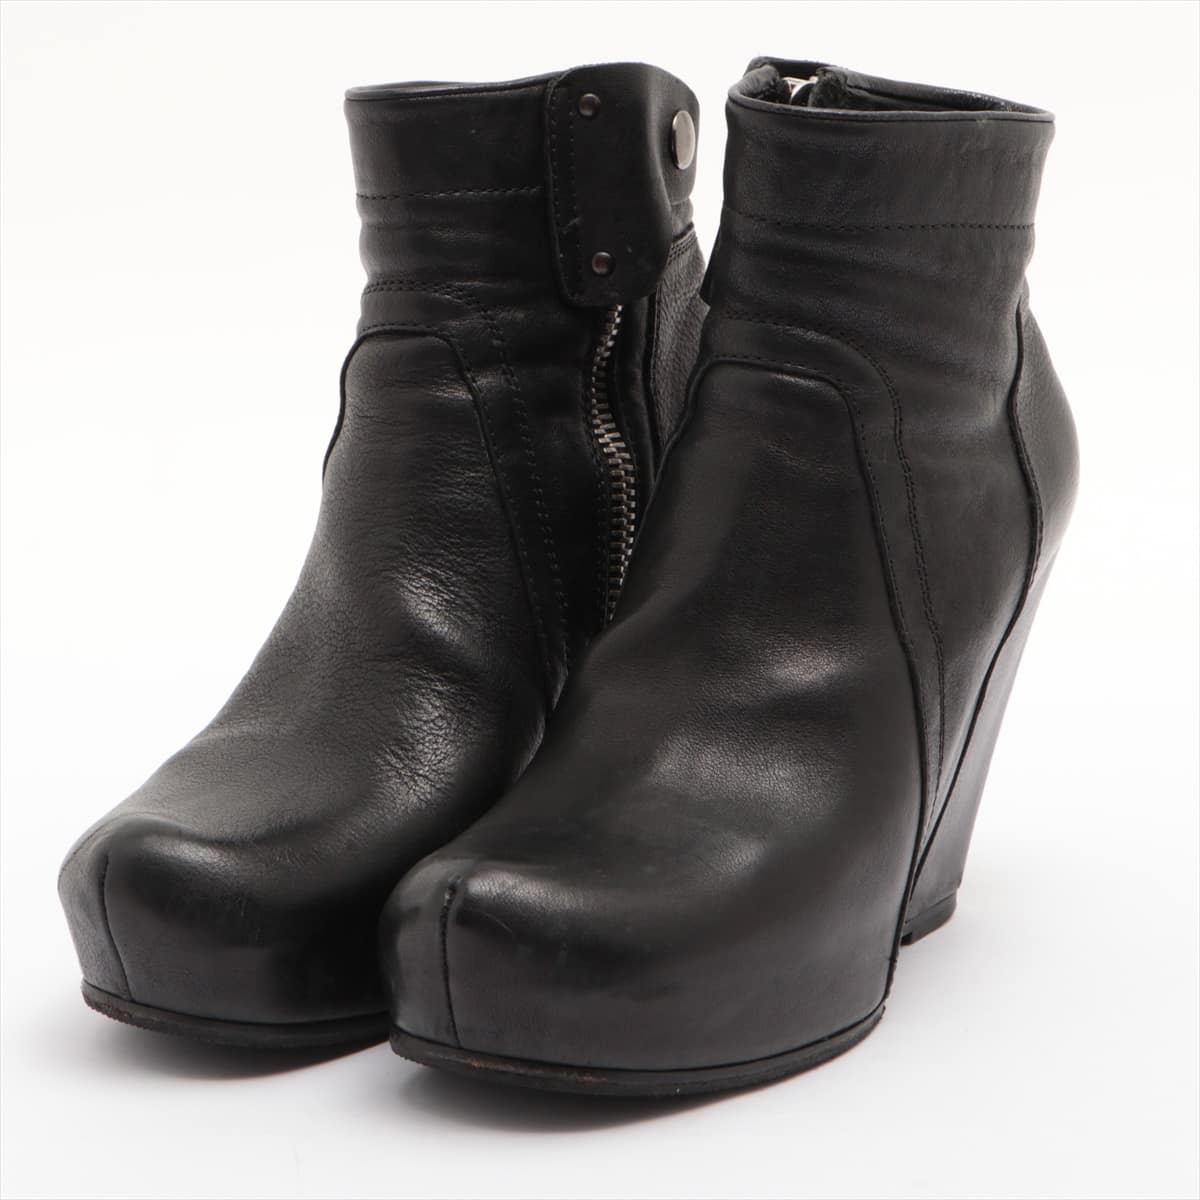 Rick Owens Leather Boots Unknown size Ladies' Black